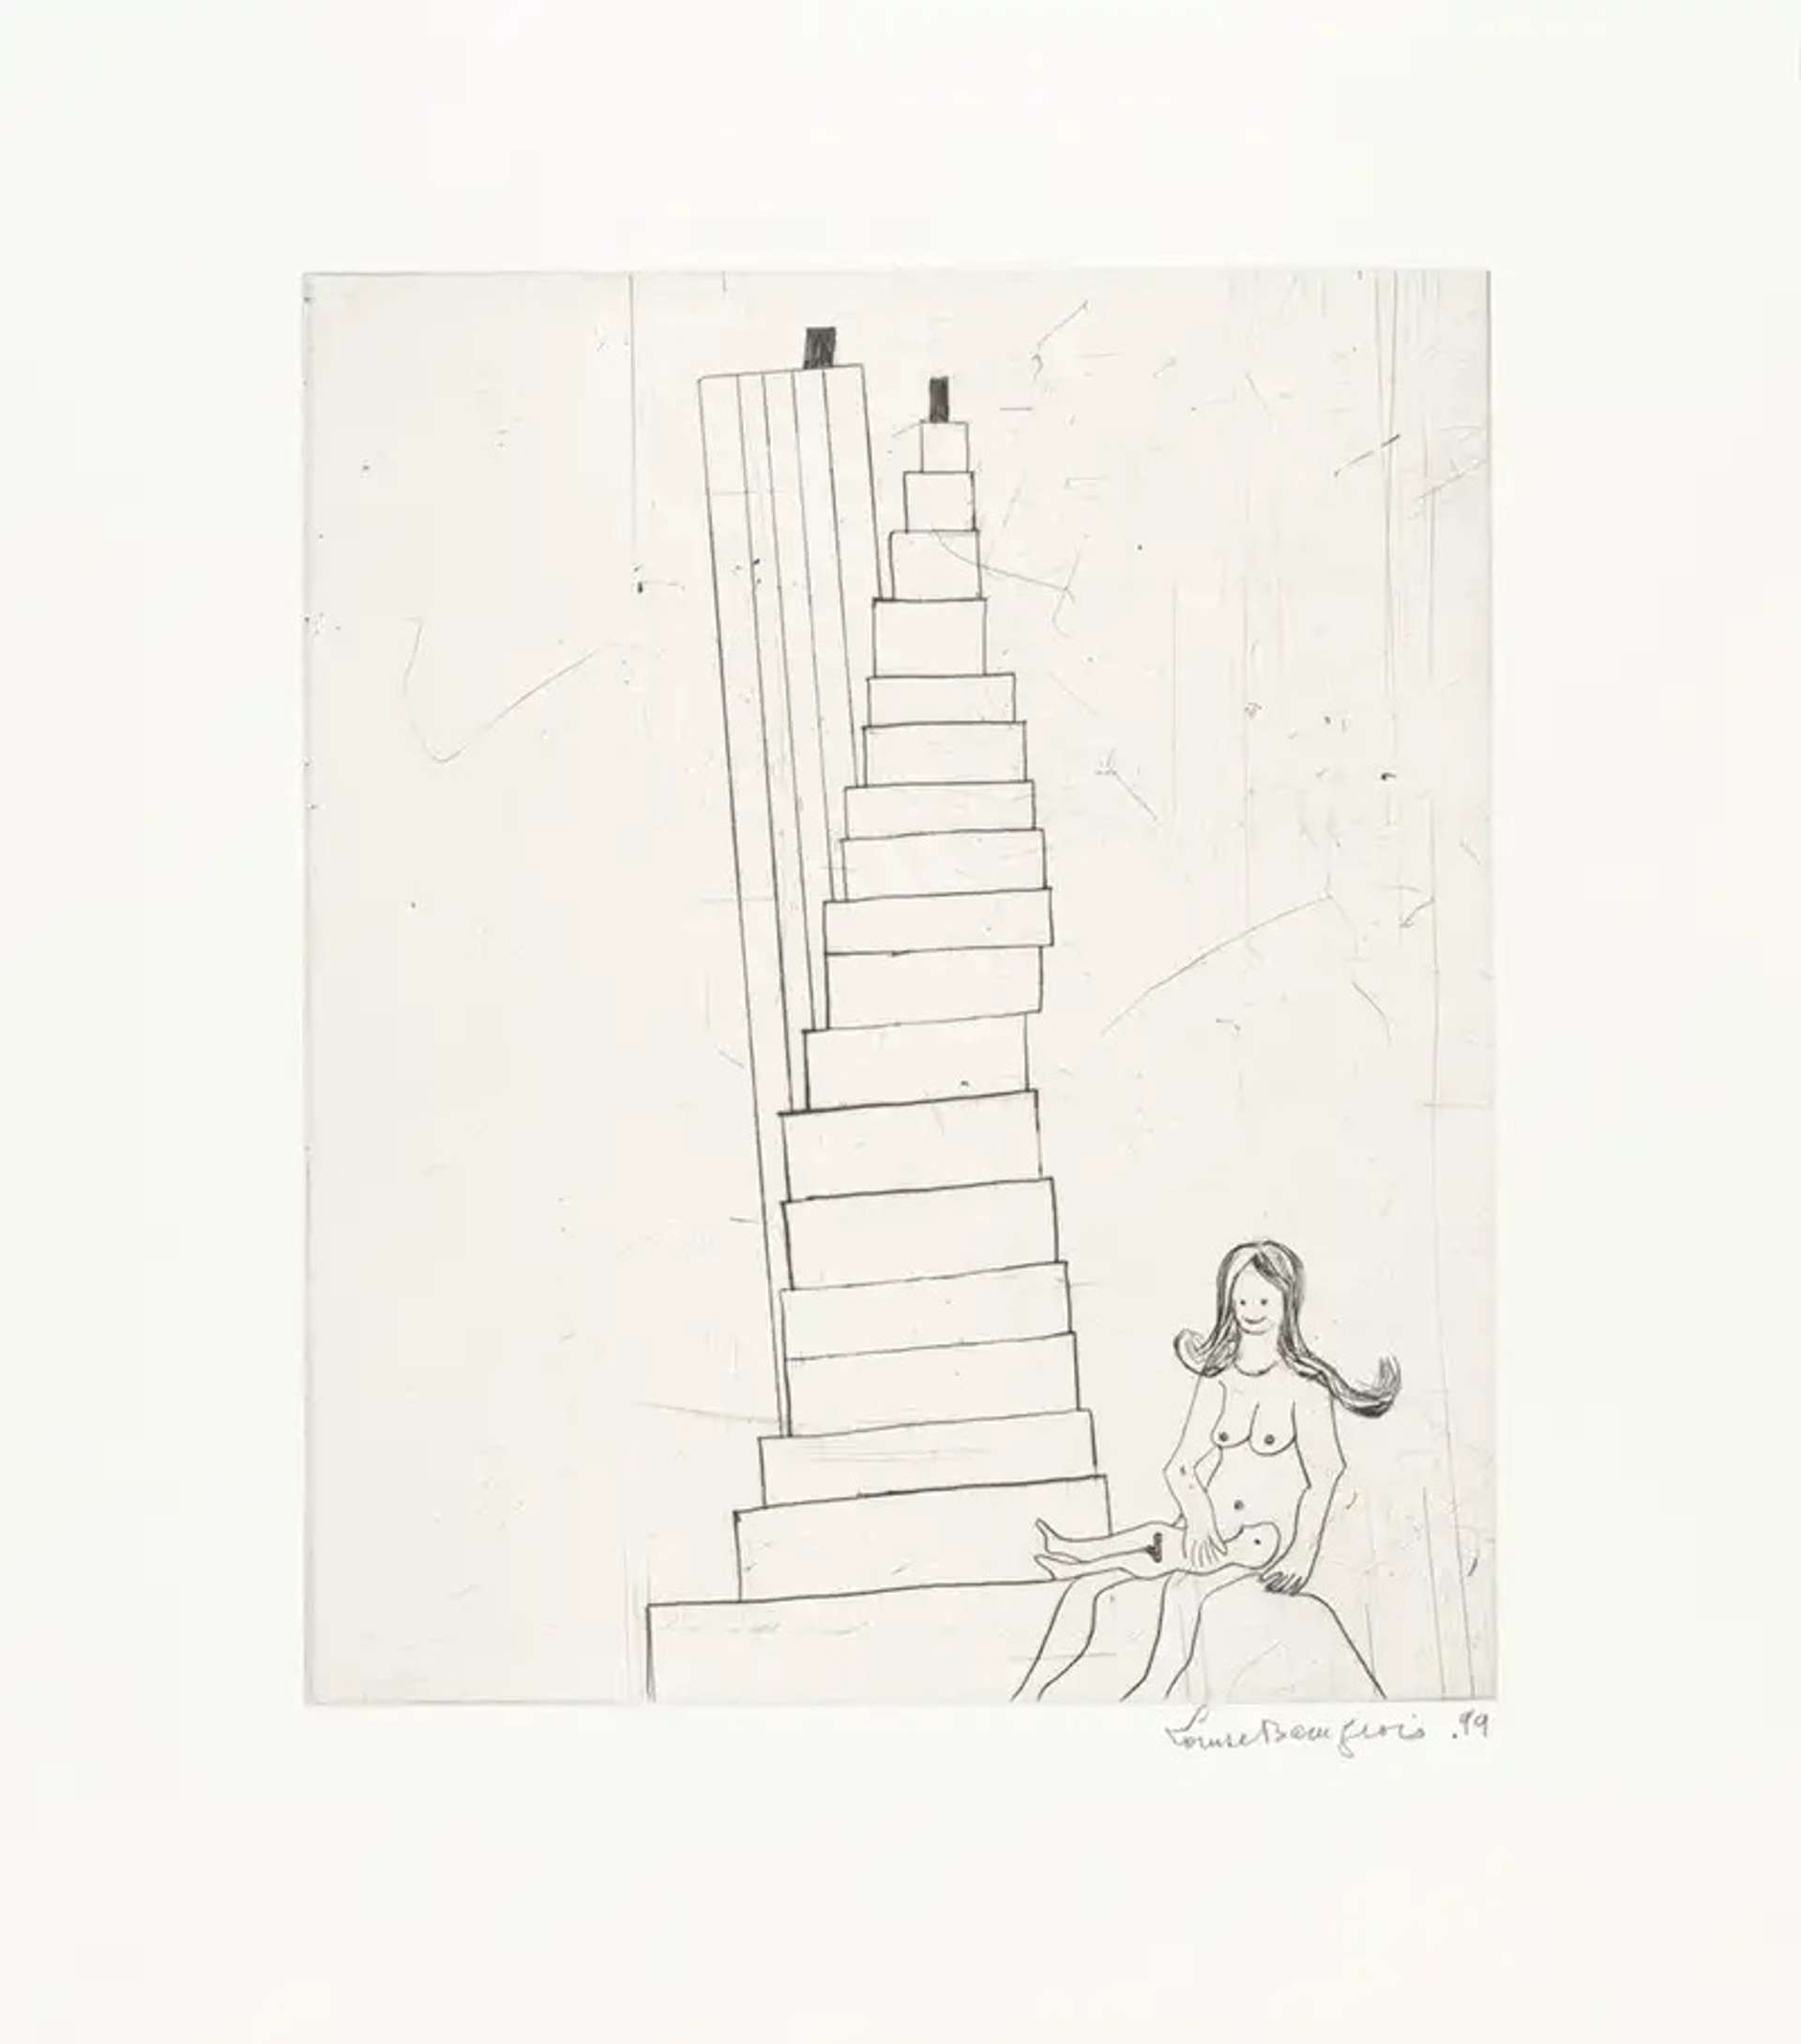 Louise Bourgeois’ Mother And Child. A drypoint print of a nude woman sitting at the bottom of a staircase with her child on her lap.